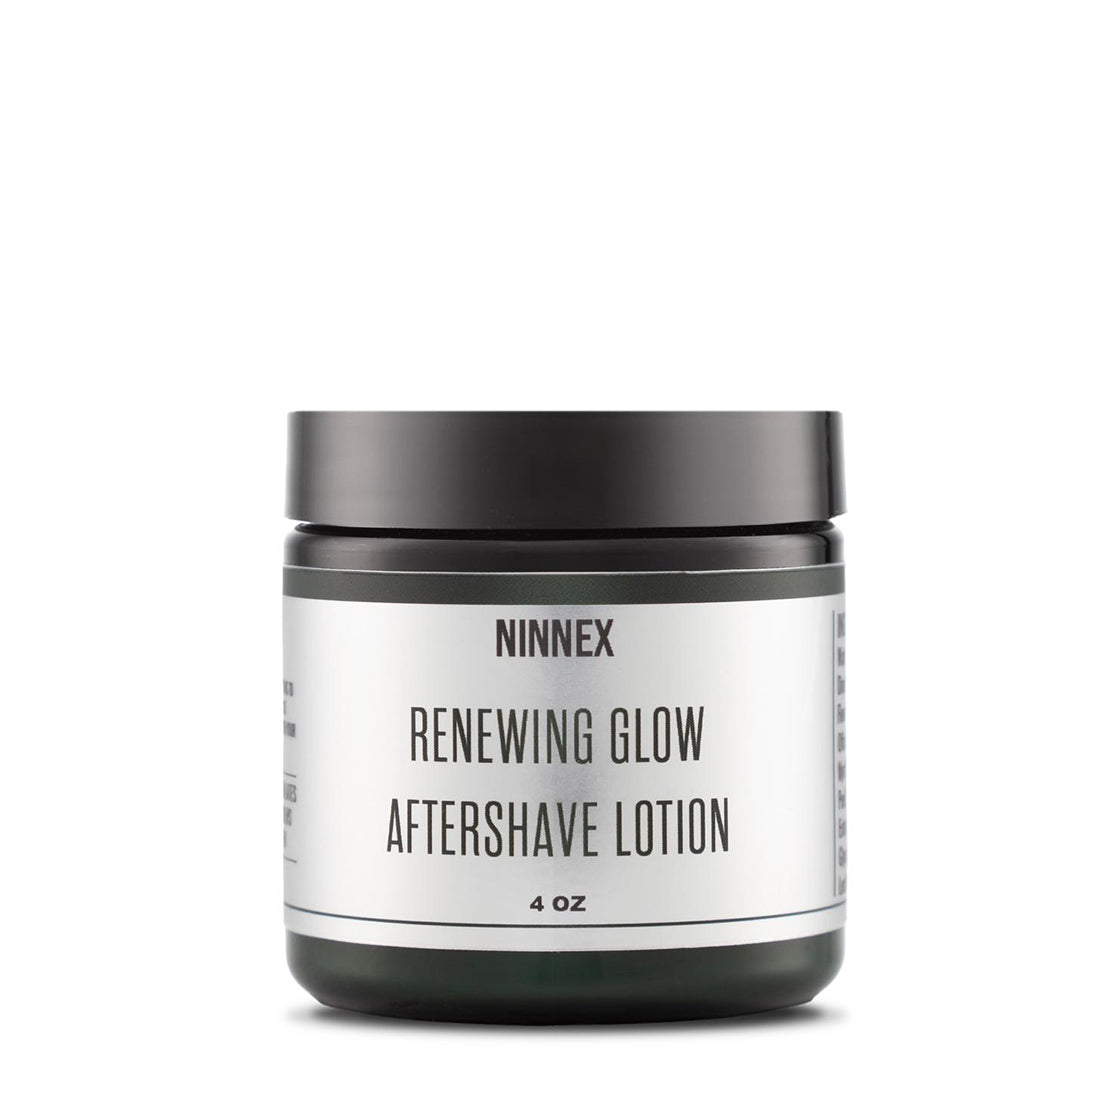 Renewing Glow Aftershave Lotion